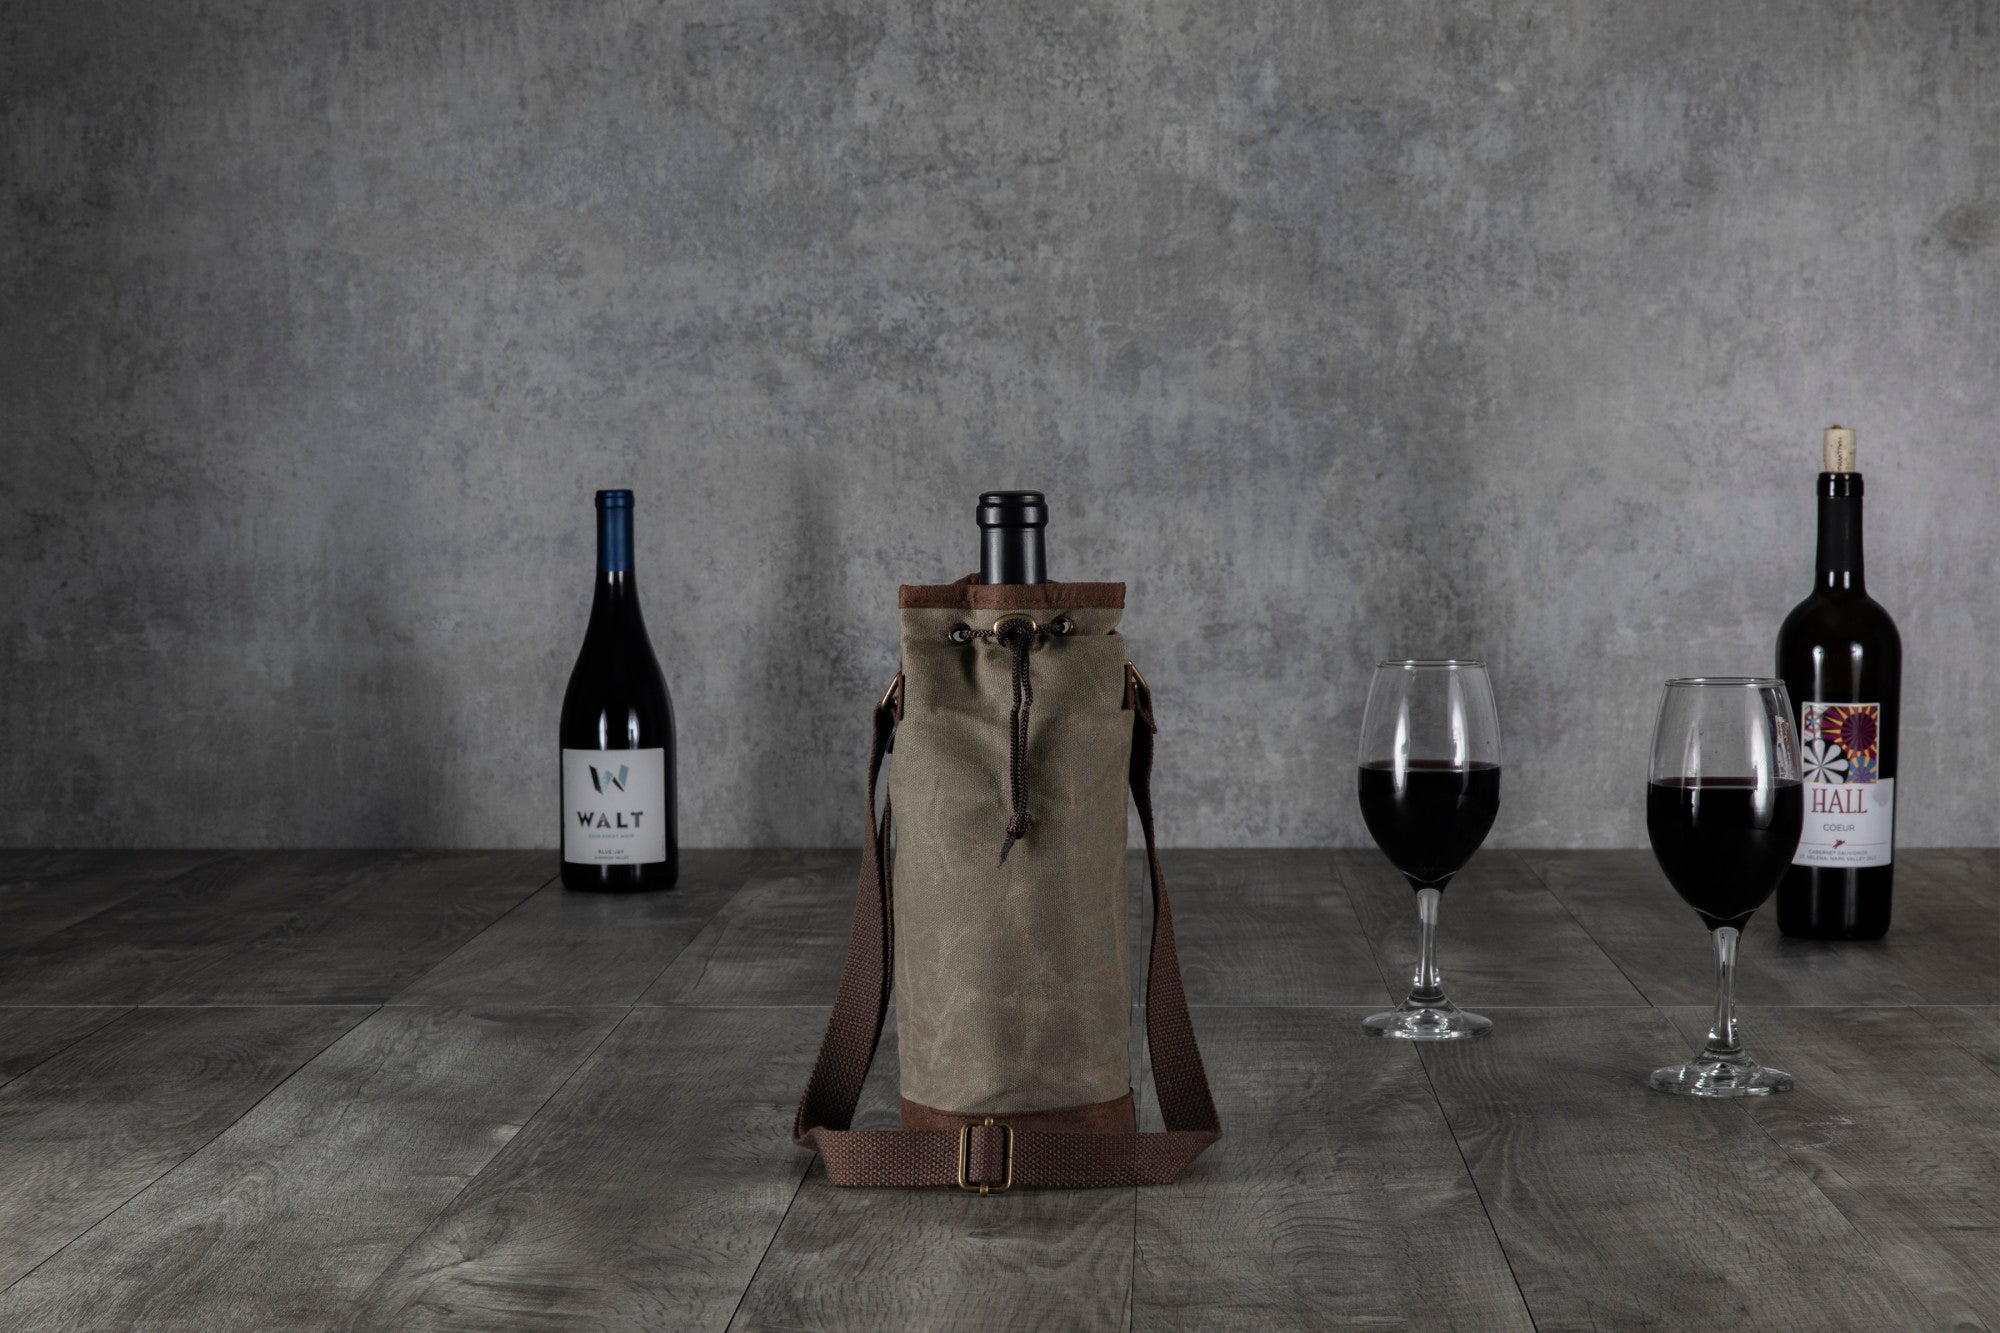 Green Bay Packers - Waxed Canvas Wine Tote